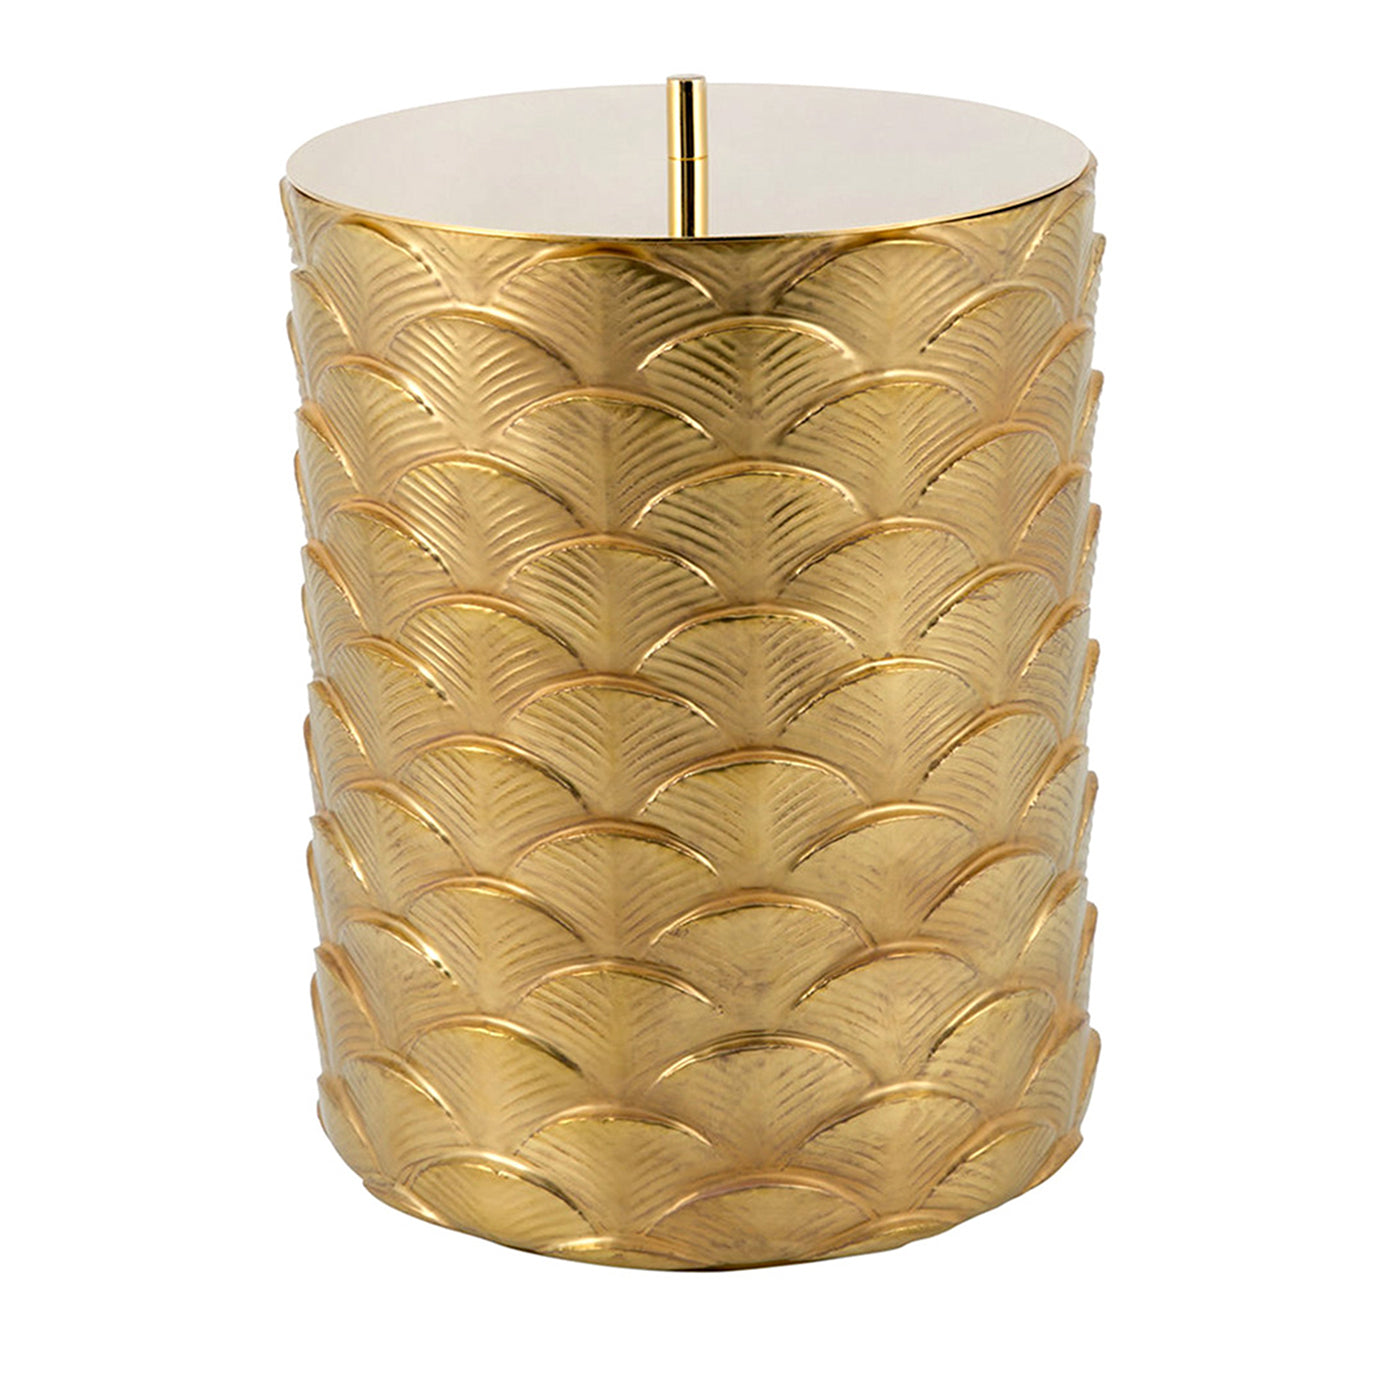 PEACOCK WASTE BASKET - GOLD - Main view